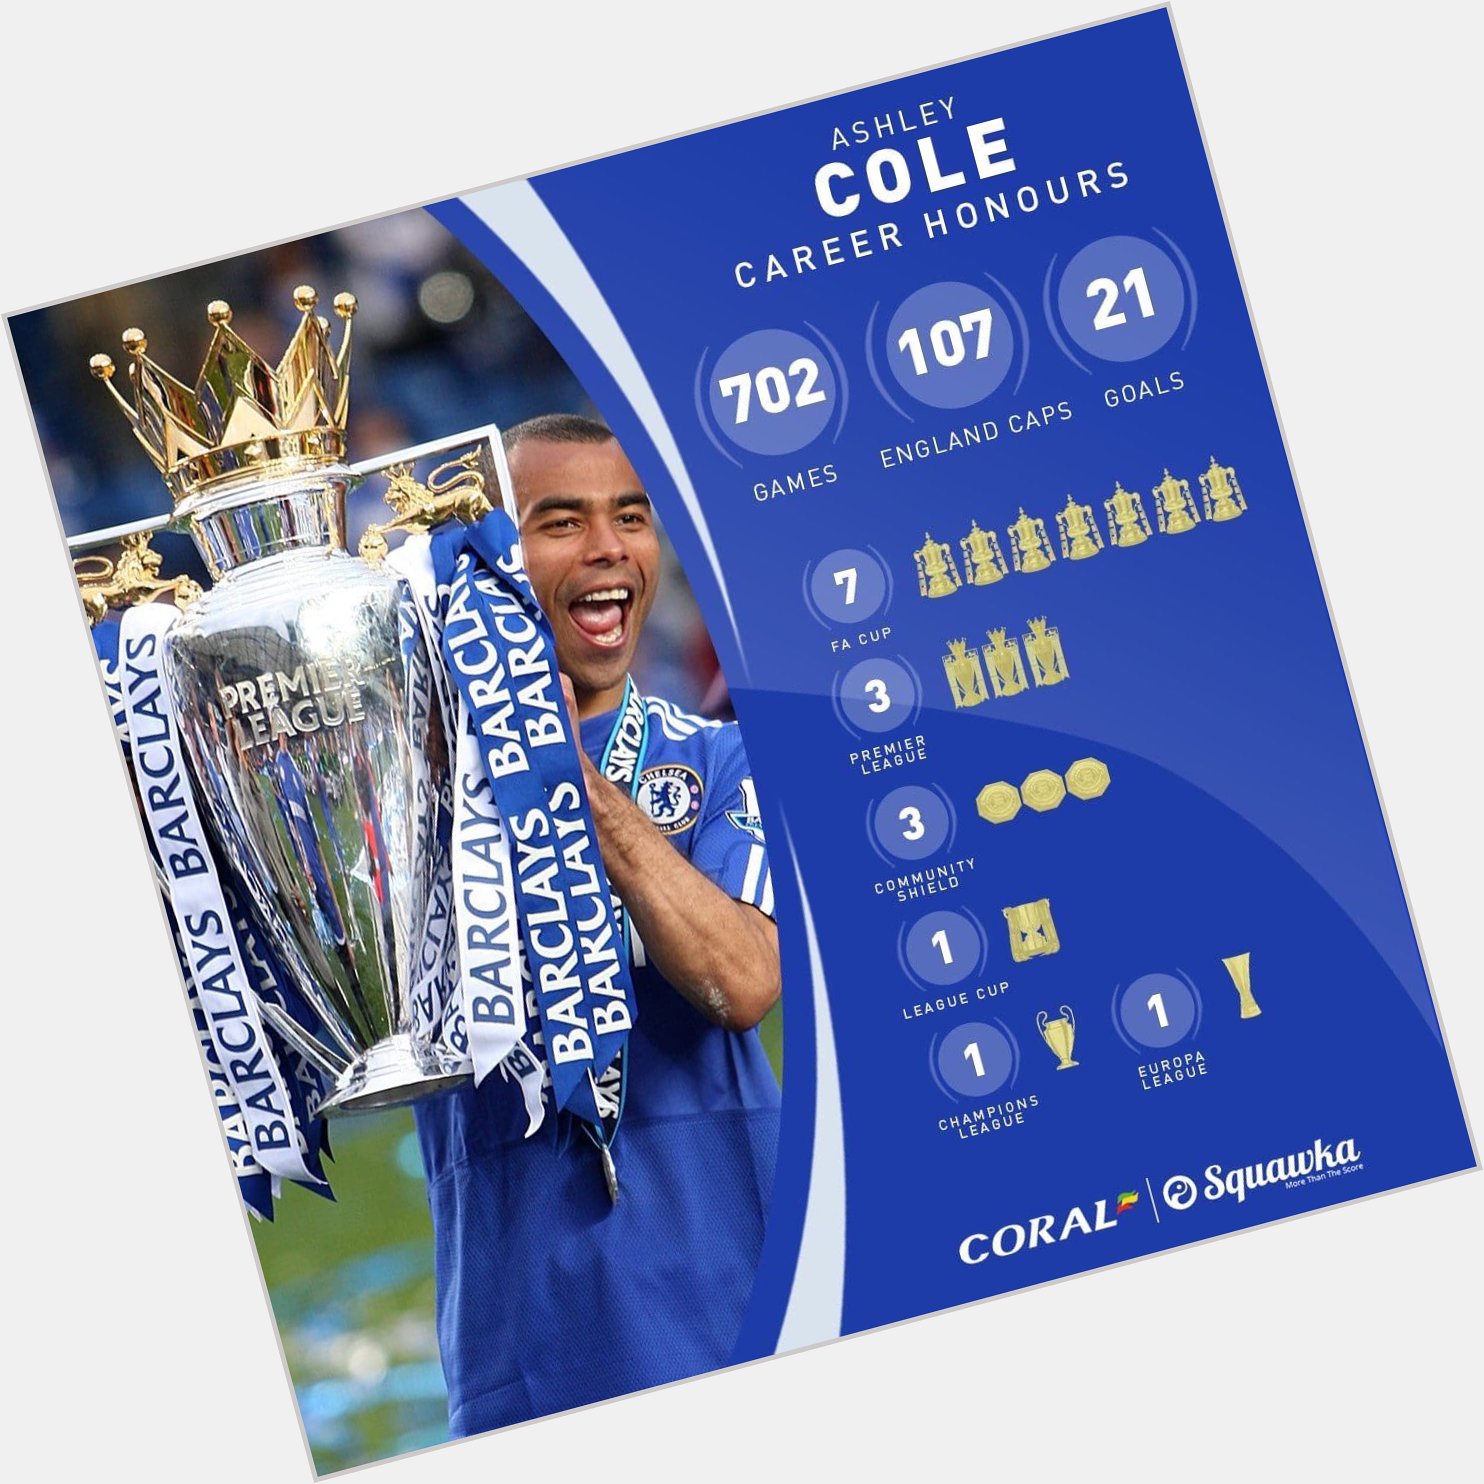 Happy birthday to Ashley Cole. One the greatest Left back in the premier league 